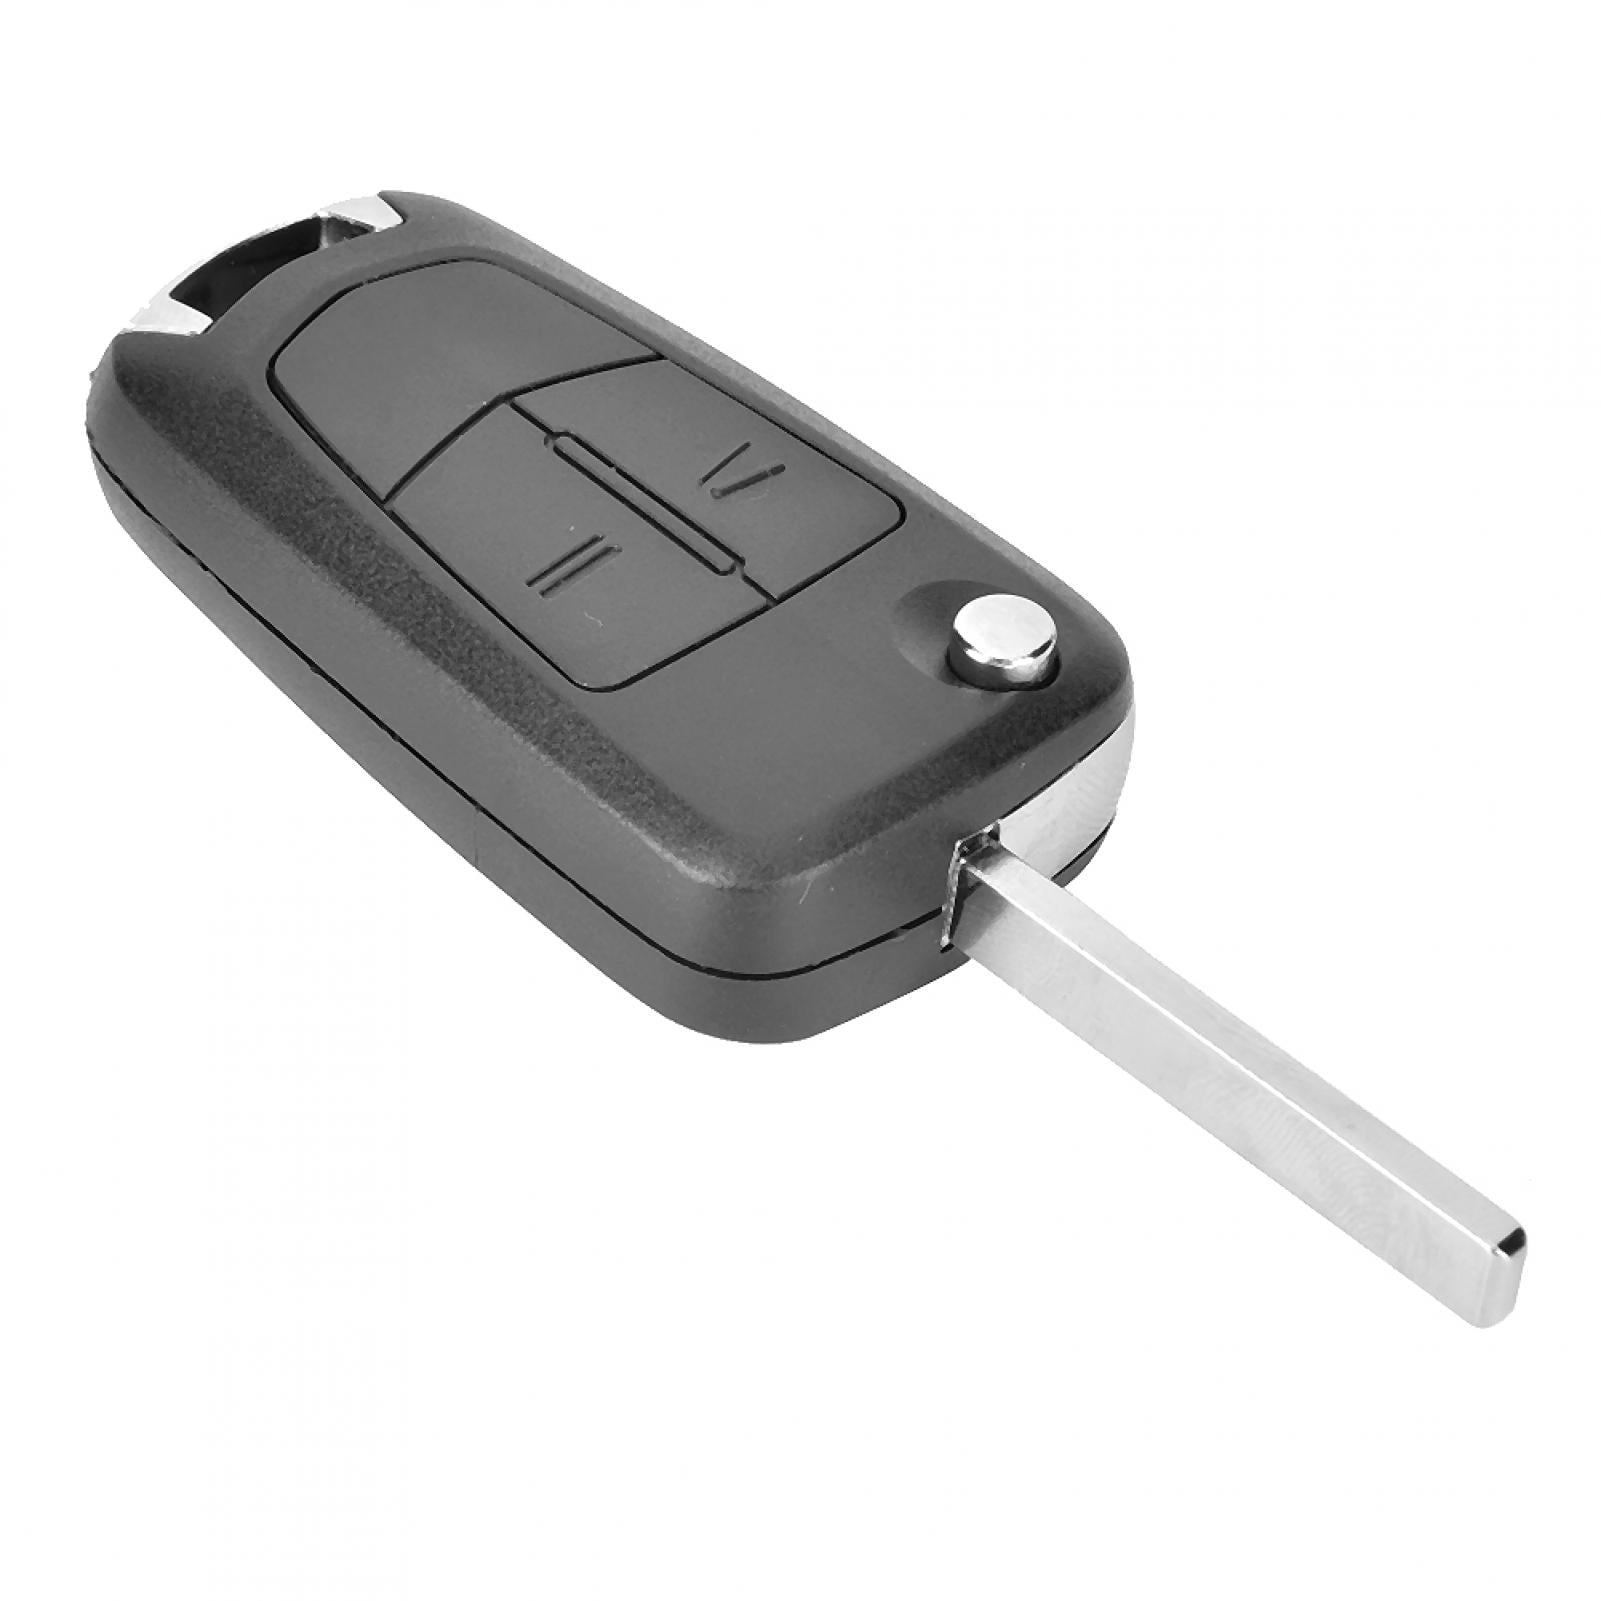 Amakey Housing Replacement Chassis Car Key Folding Key for Opel2 Keys